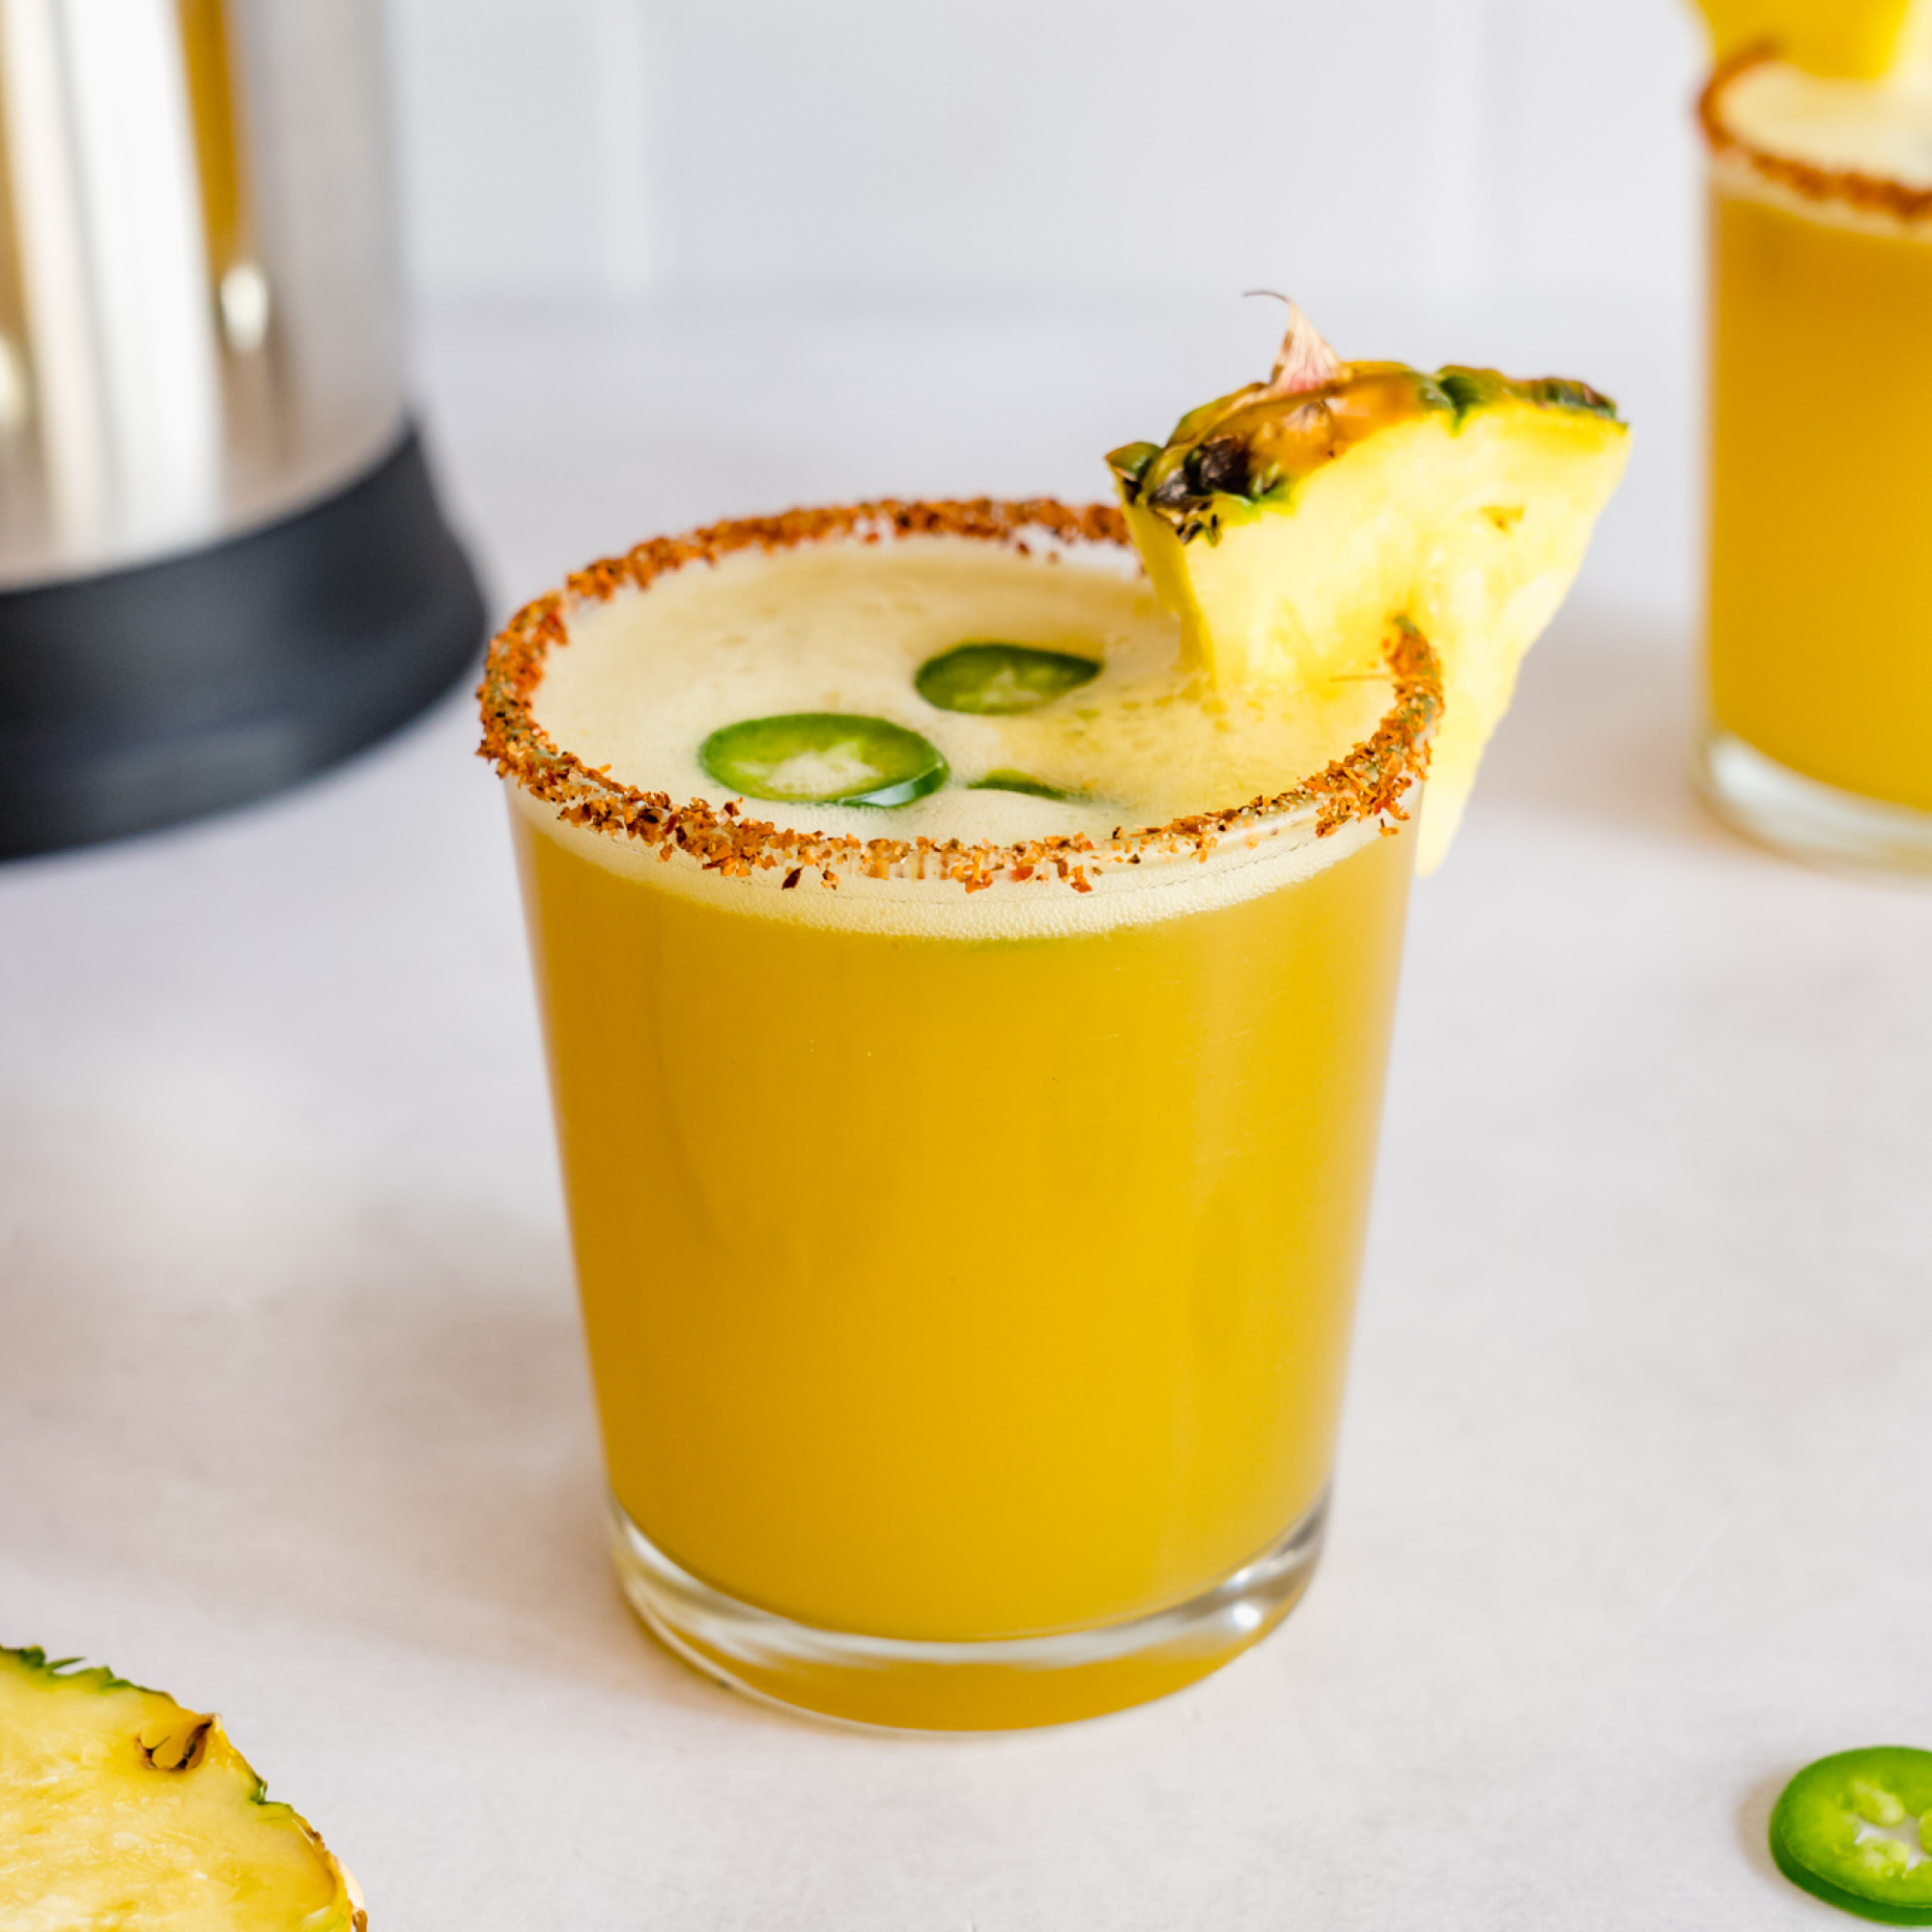 Craving some heat in your drink? Our Pineapple Chili Margarita is the perfect blend of sweet, spicy, and refreshing!